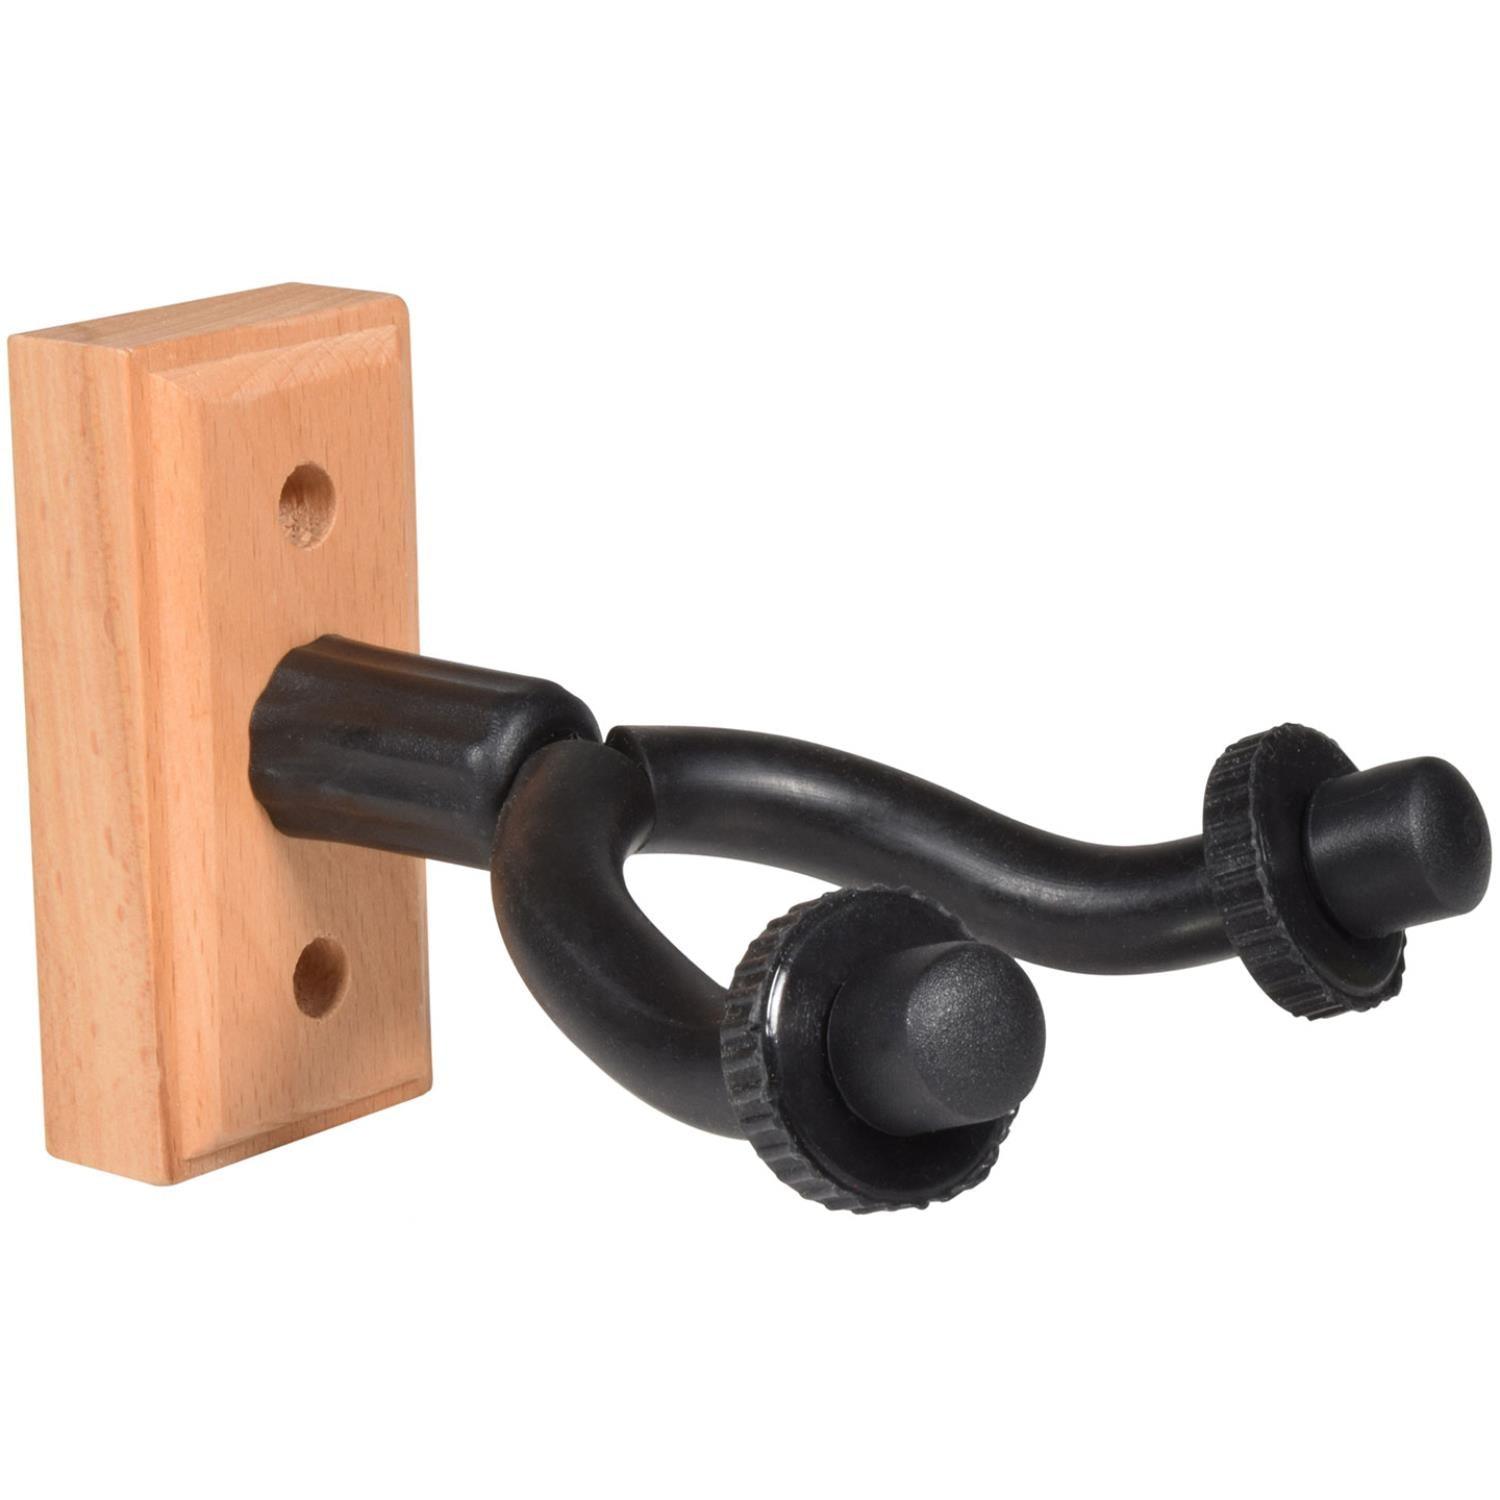 Chord Guitar Wall Bracket with Wooden Base - DY Pro Audio